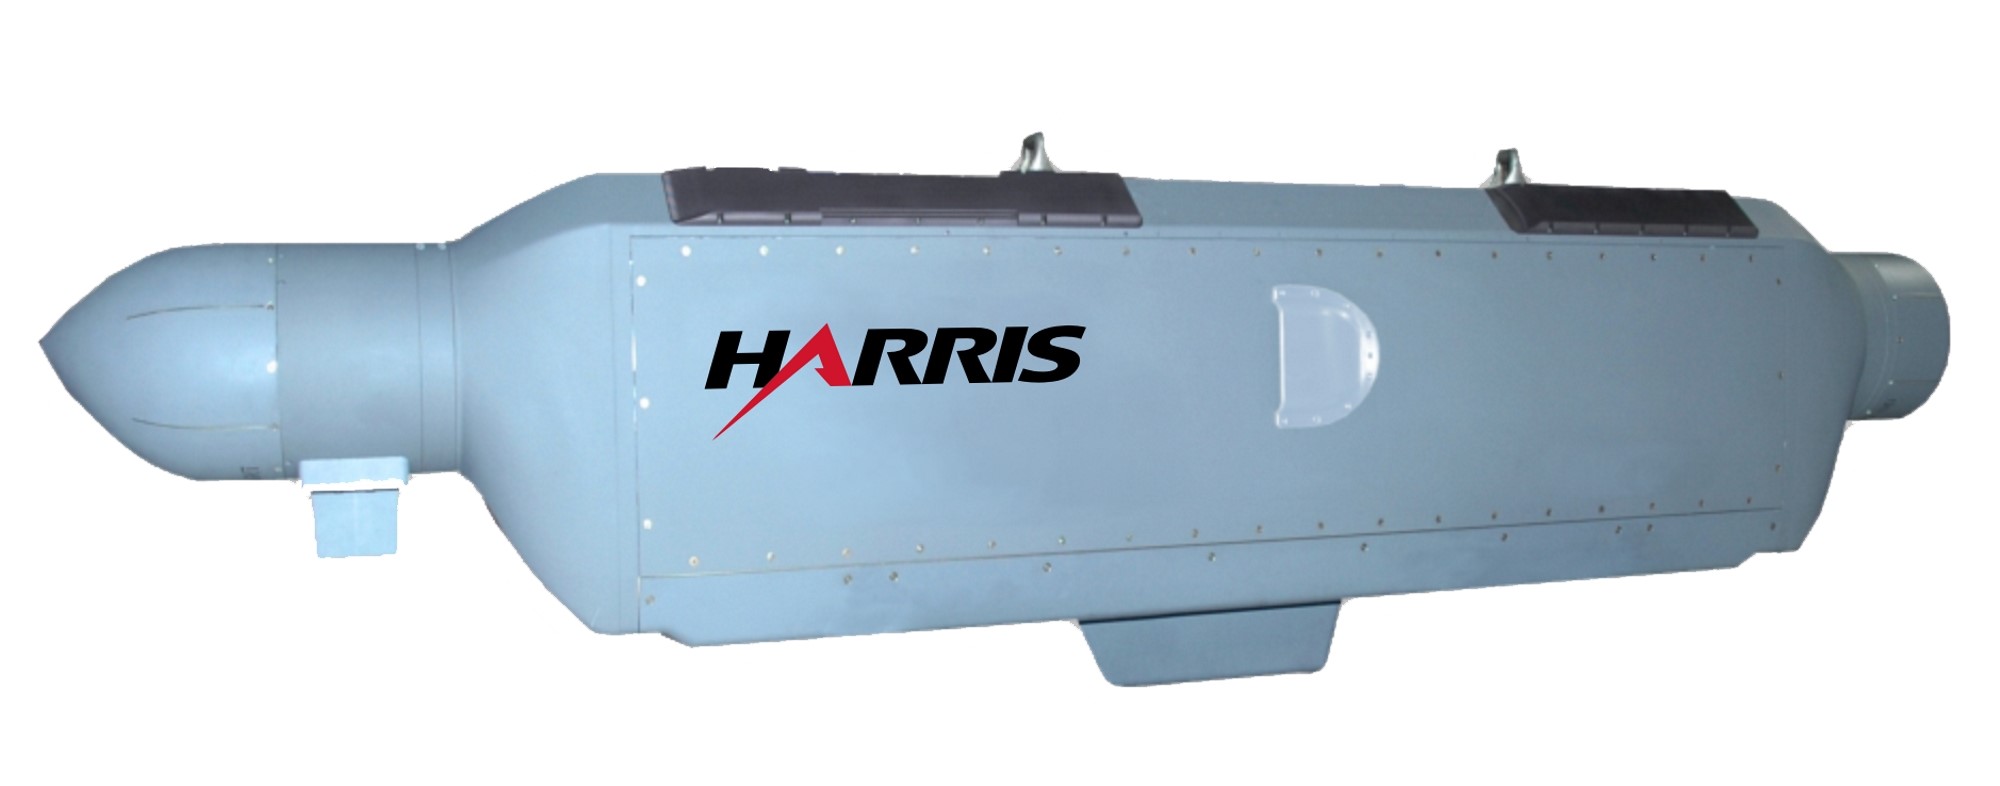 L3Harris Technologies AN/ALQ-211 Advanced Integrated Defensive Electronic Warfare Suite (AIDEWS) systems